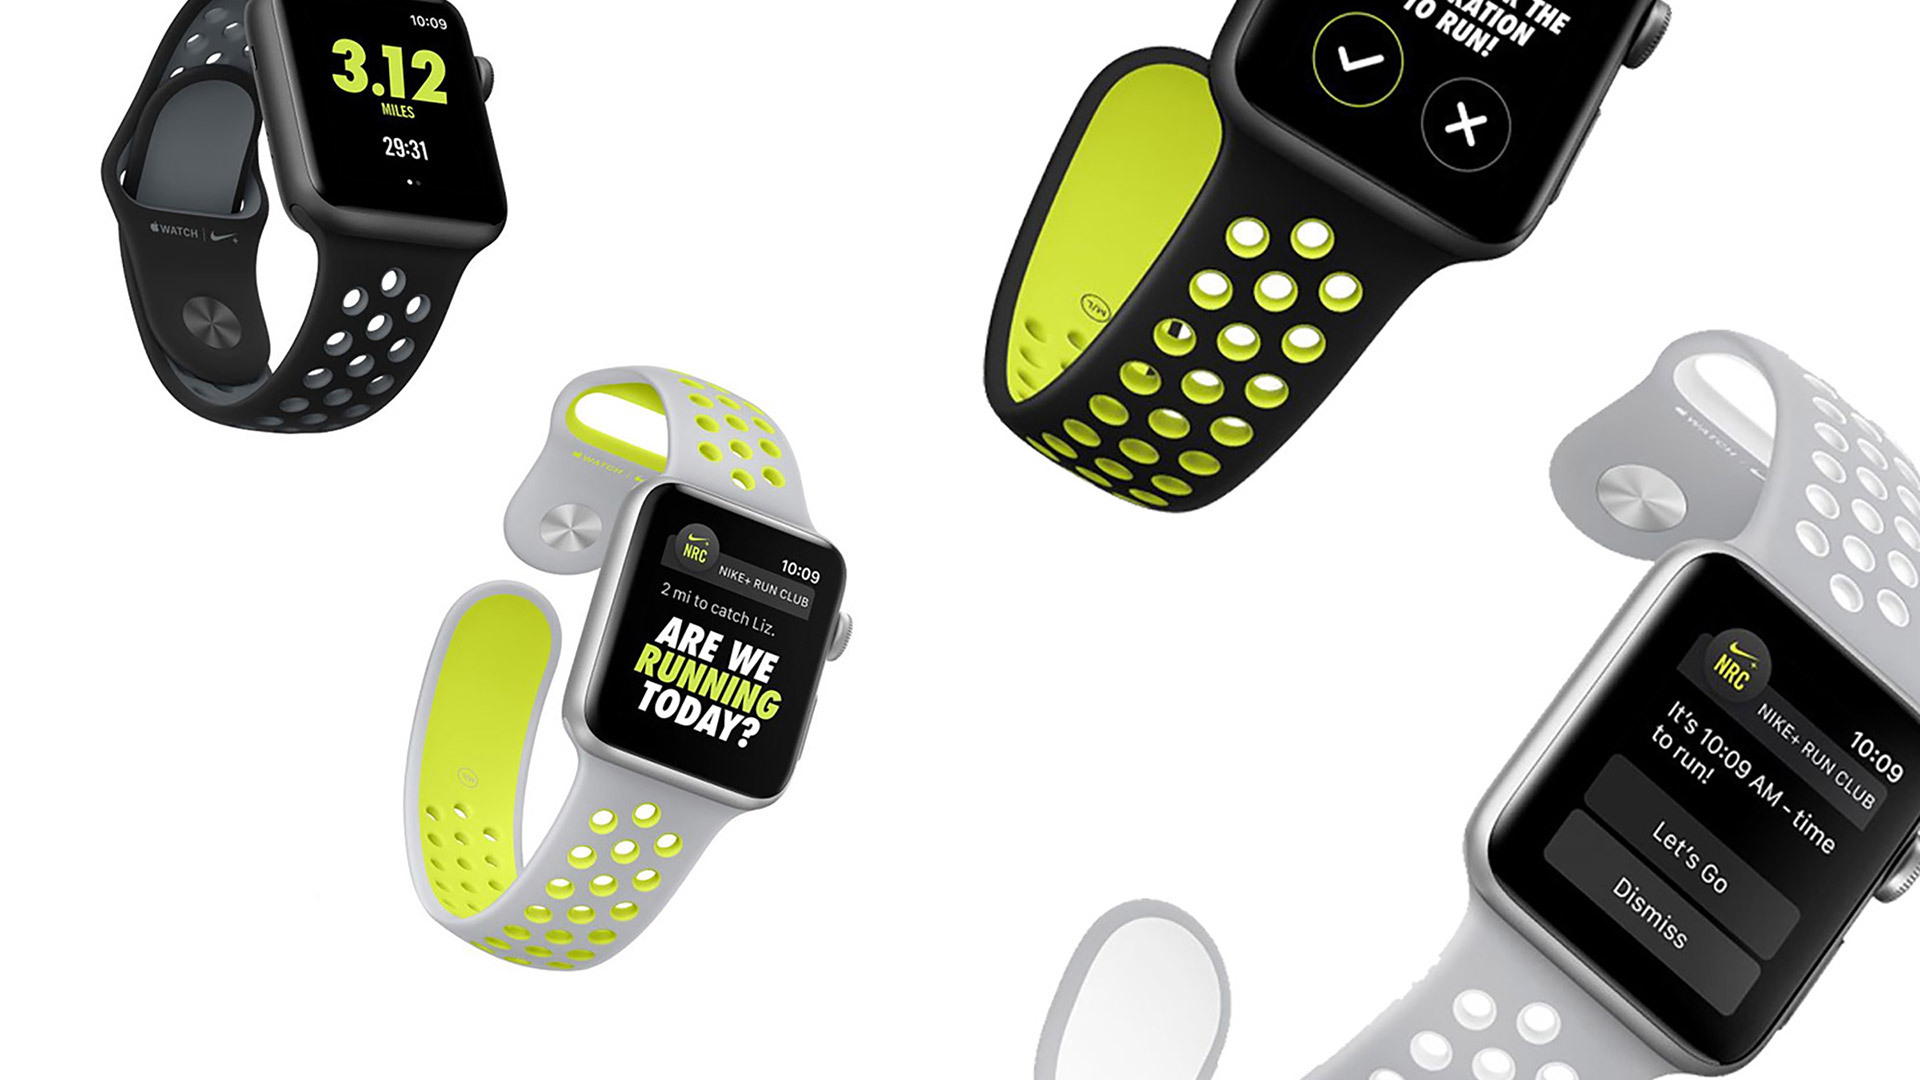 The Apple Watch Nike+'s visual for the One Show.